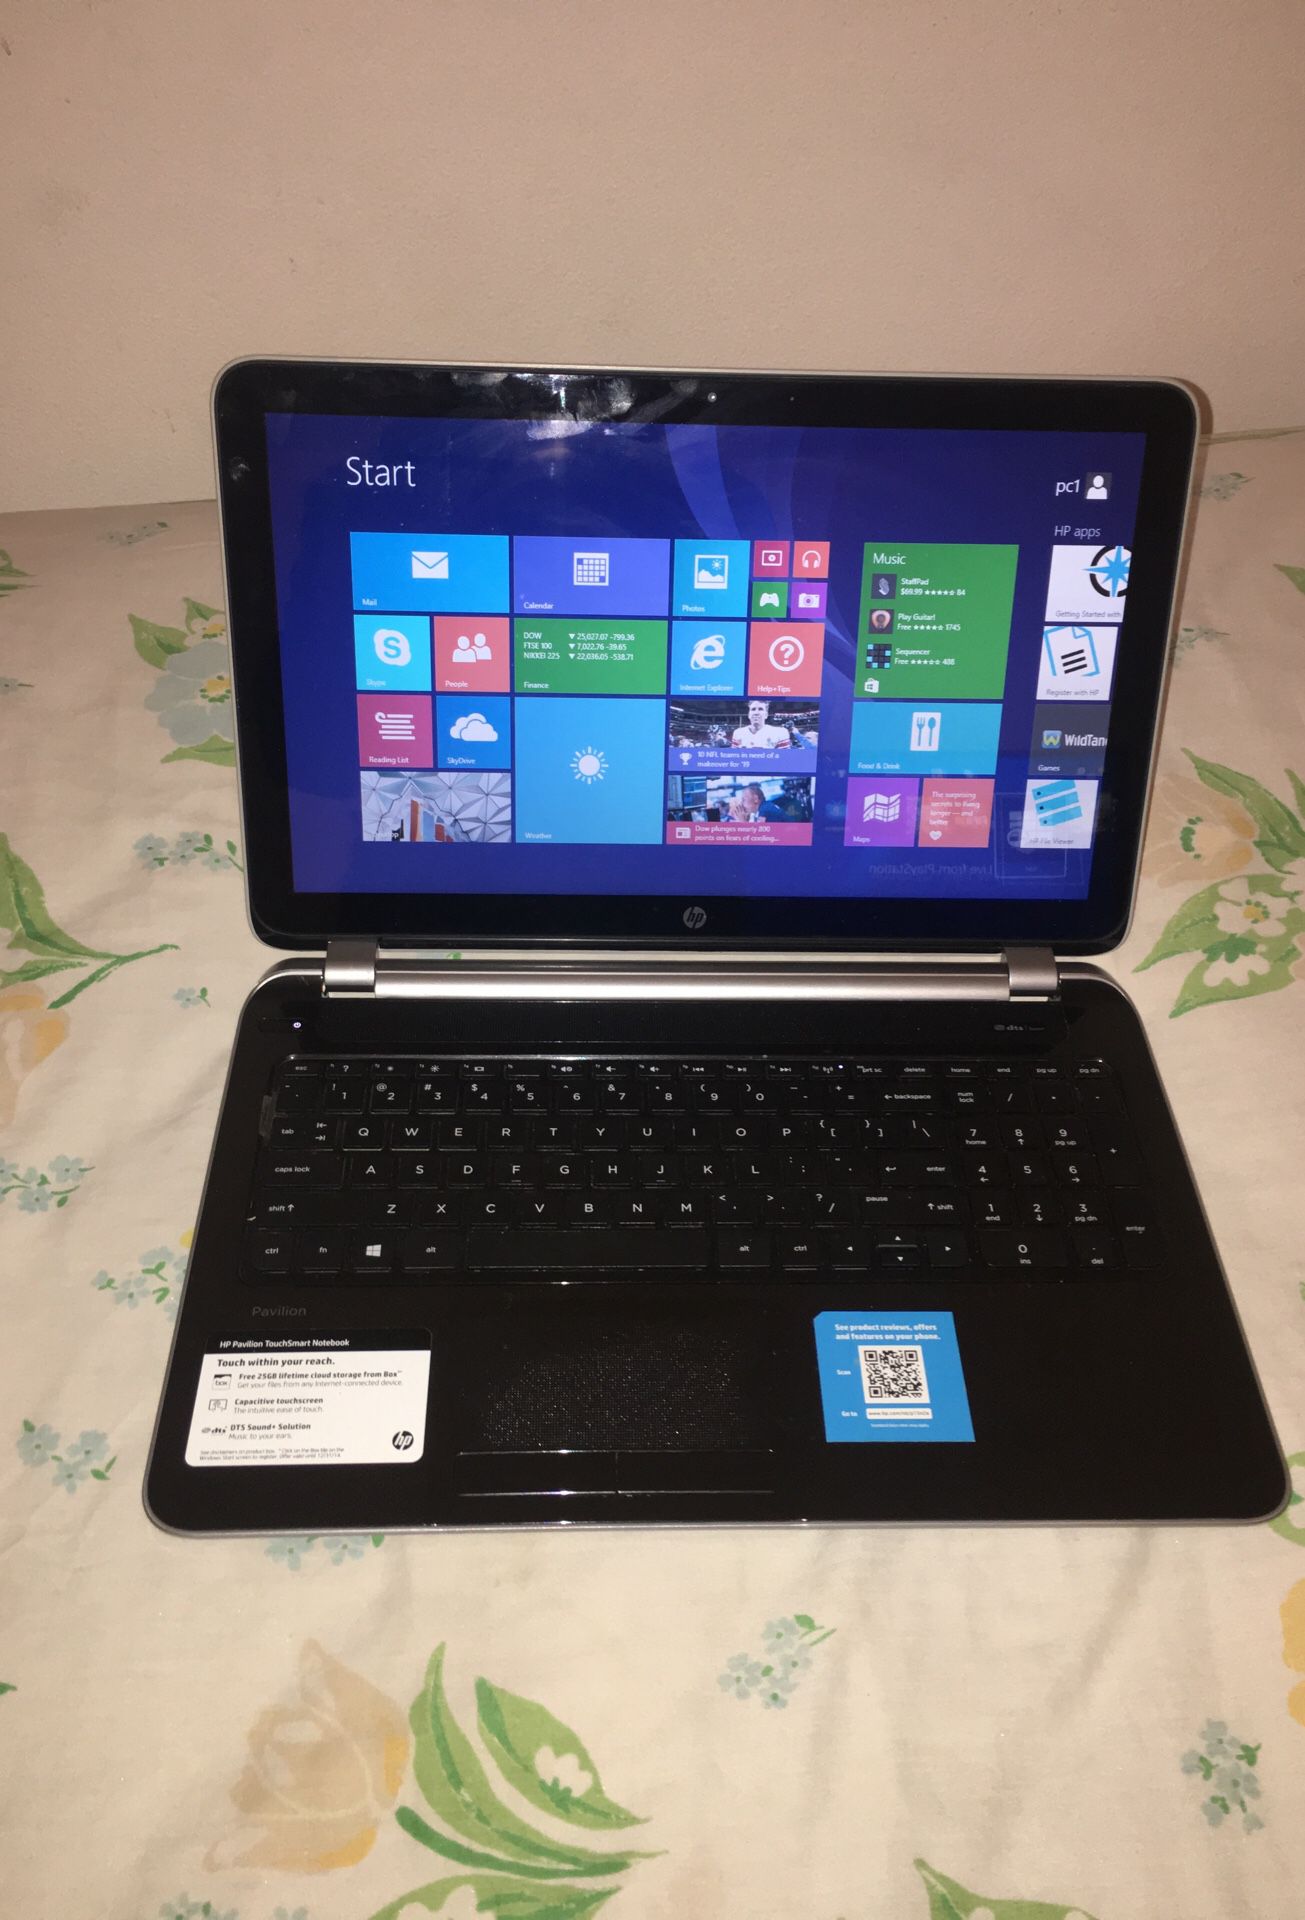 HP Pavilion TouchSmart Notebook -free 25GB lifetime cloud storage from box -capacitive touchscreen -DTS sound+solution